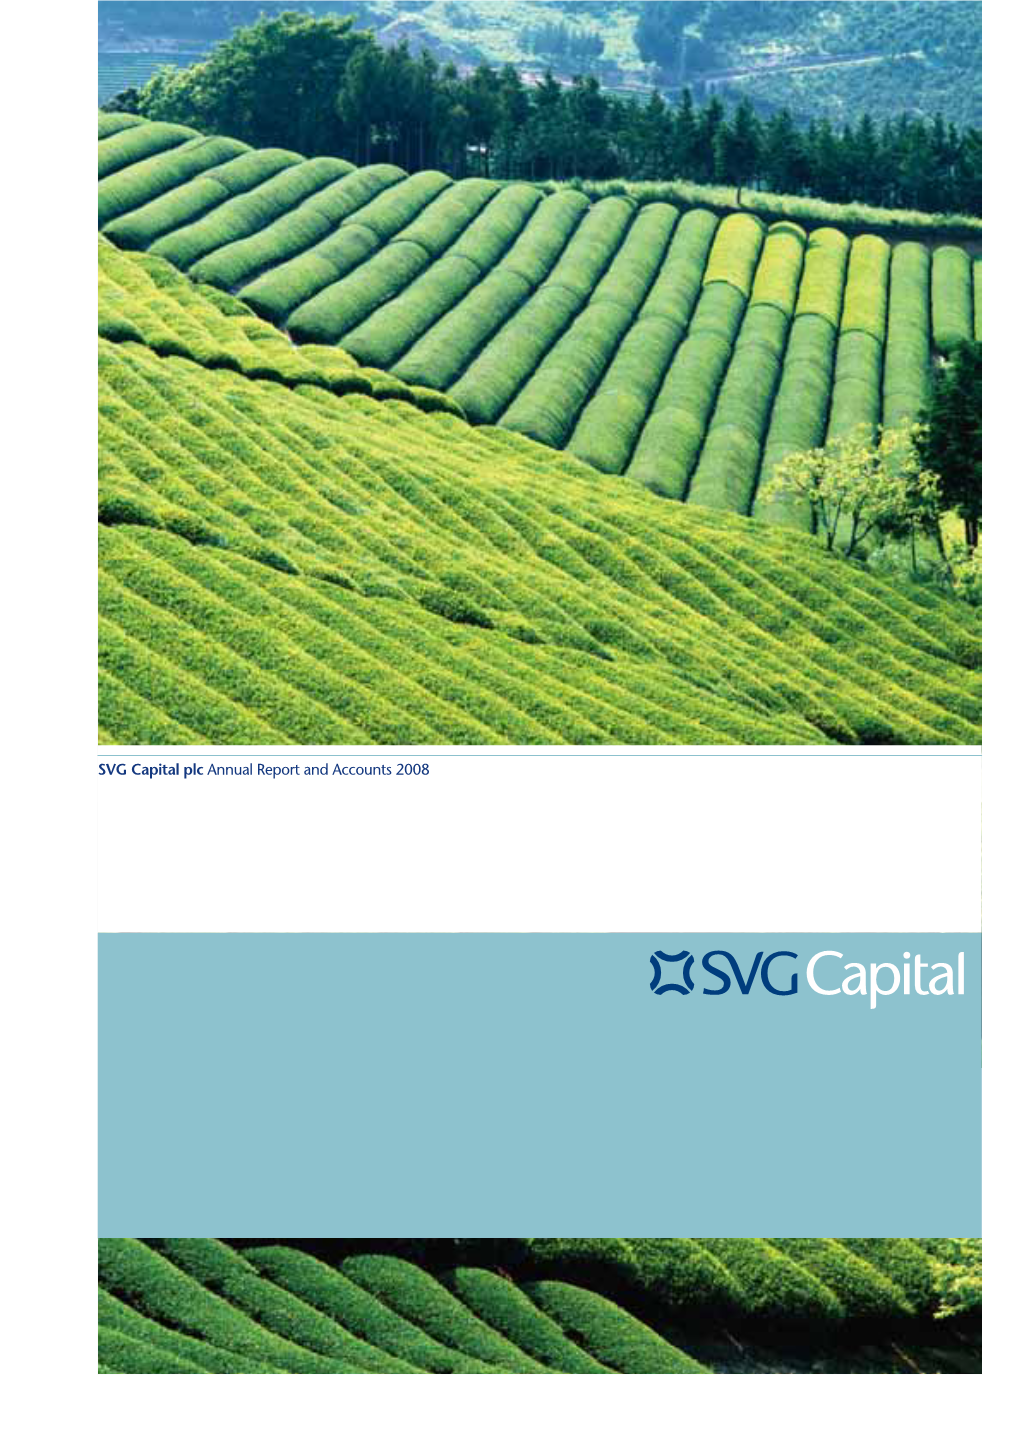 SVG Capital Plc Annual Report and Accounts 2008 Welcome to SVG Capital Plc